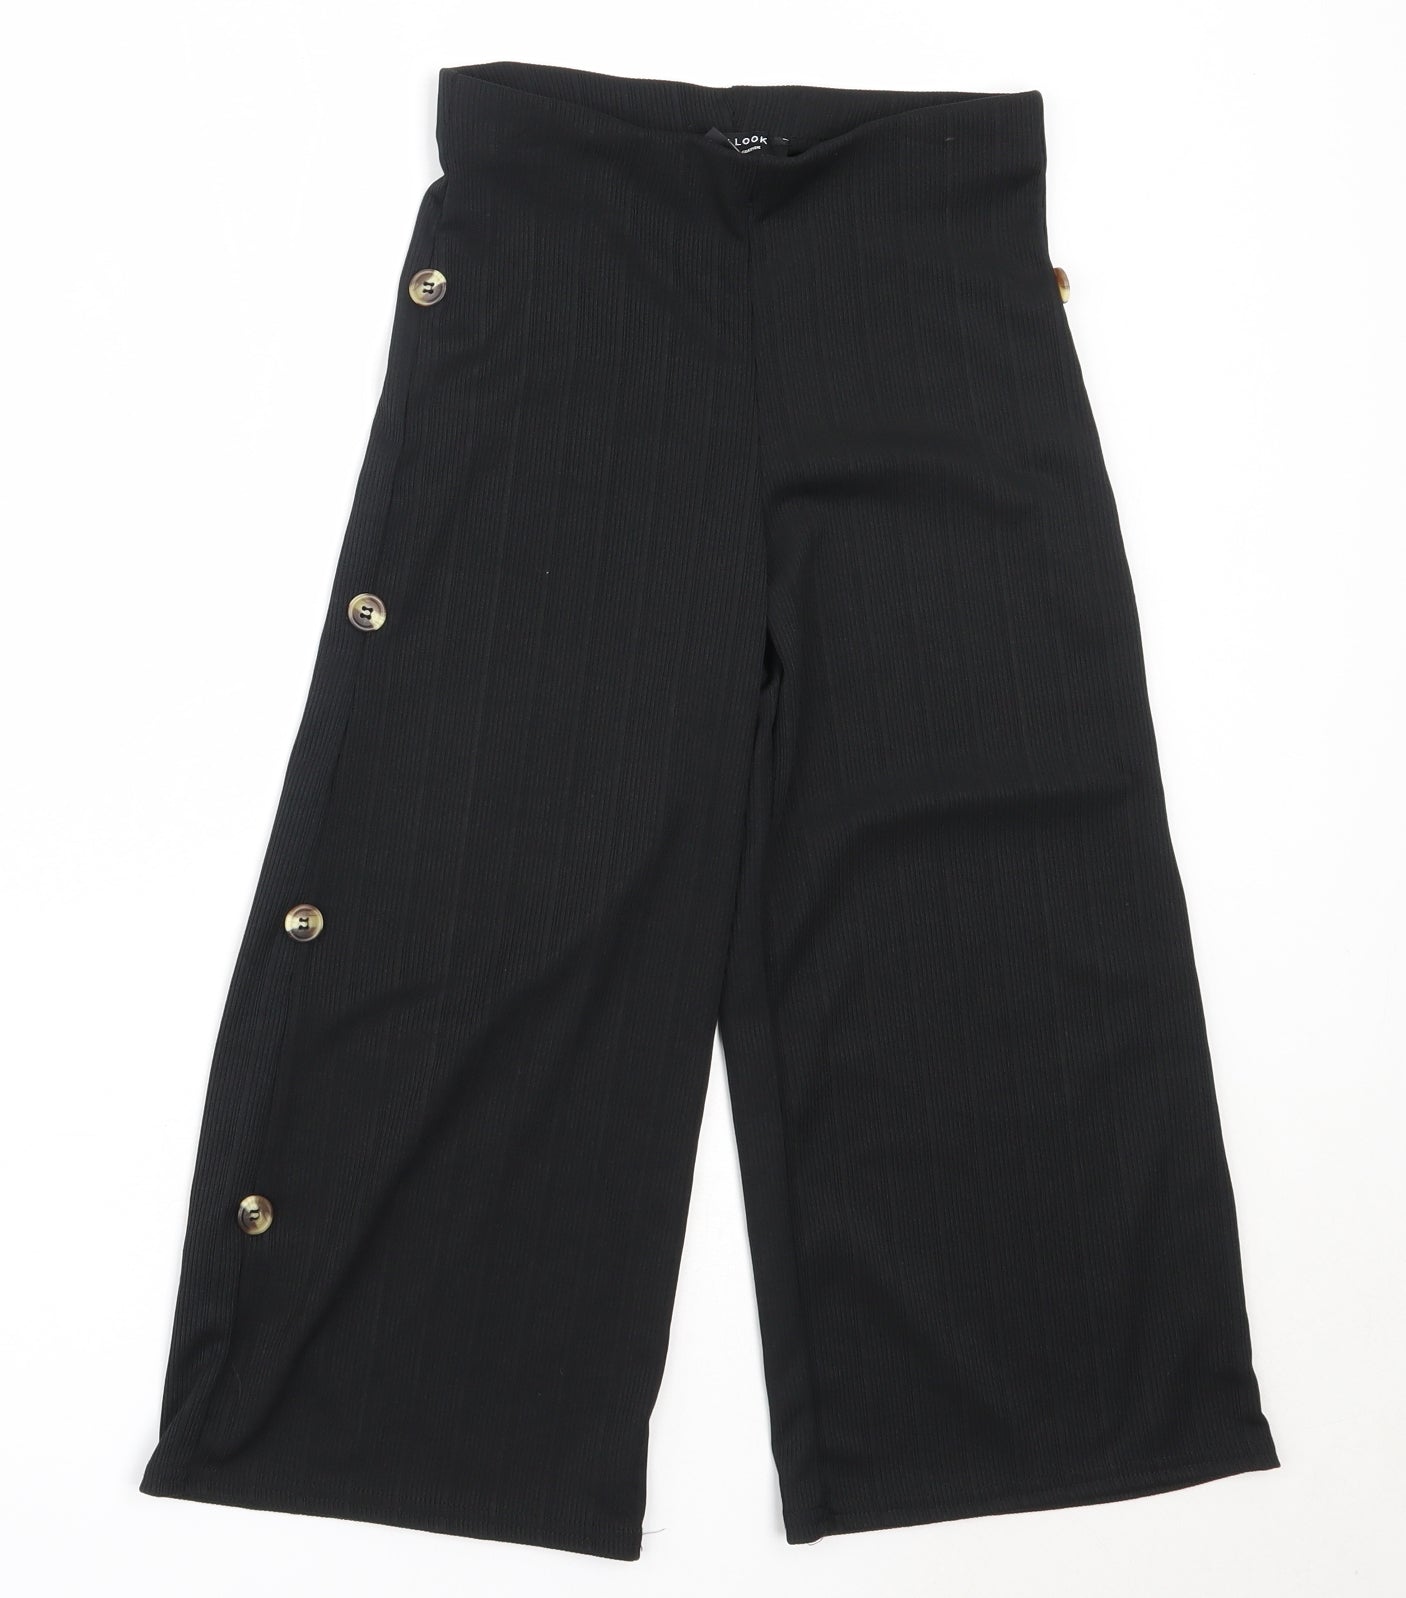 New Look Girls Black  Polyester Dress Pants Trousers Size 9 Years  Regular